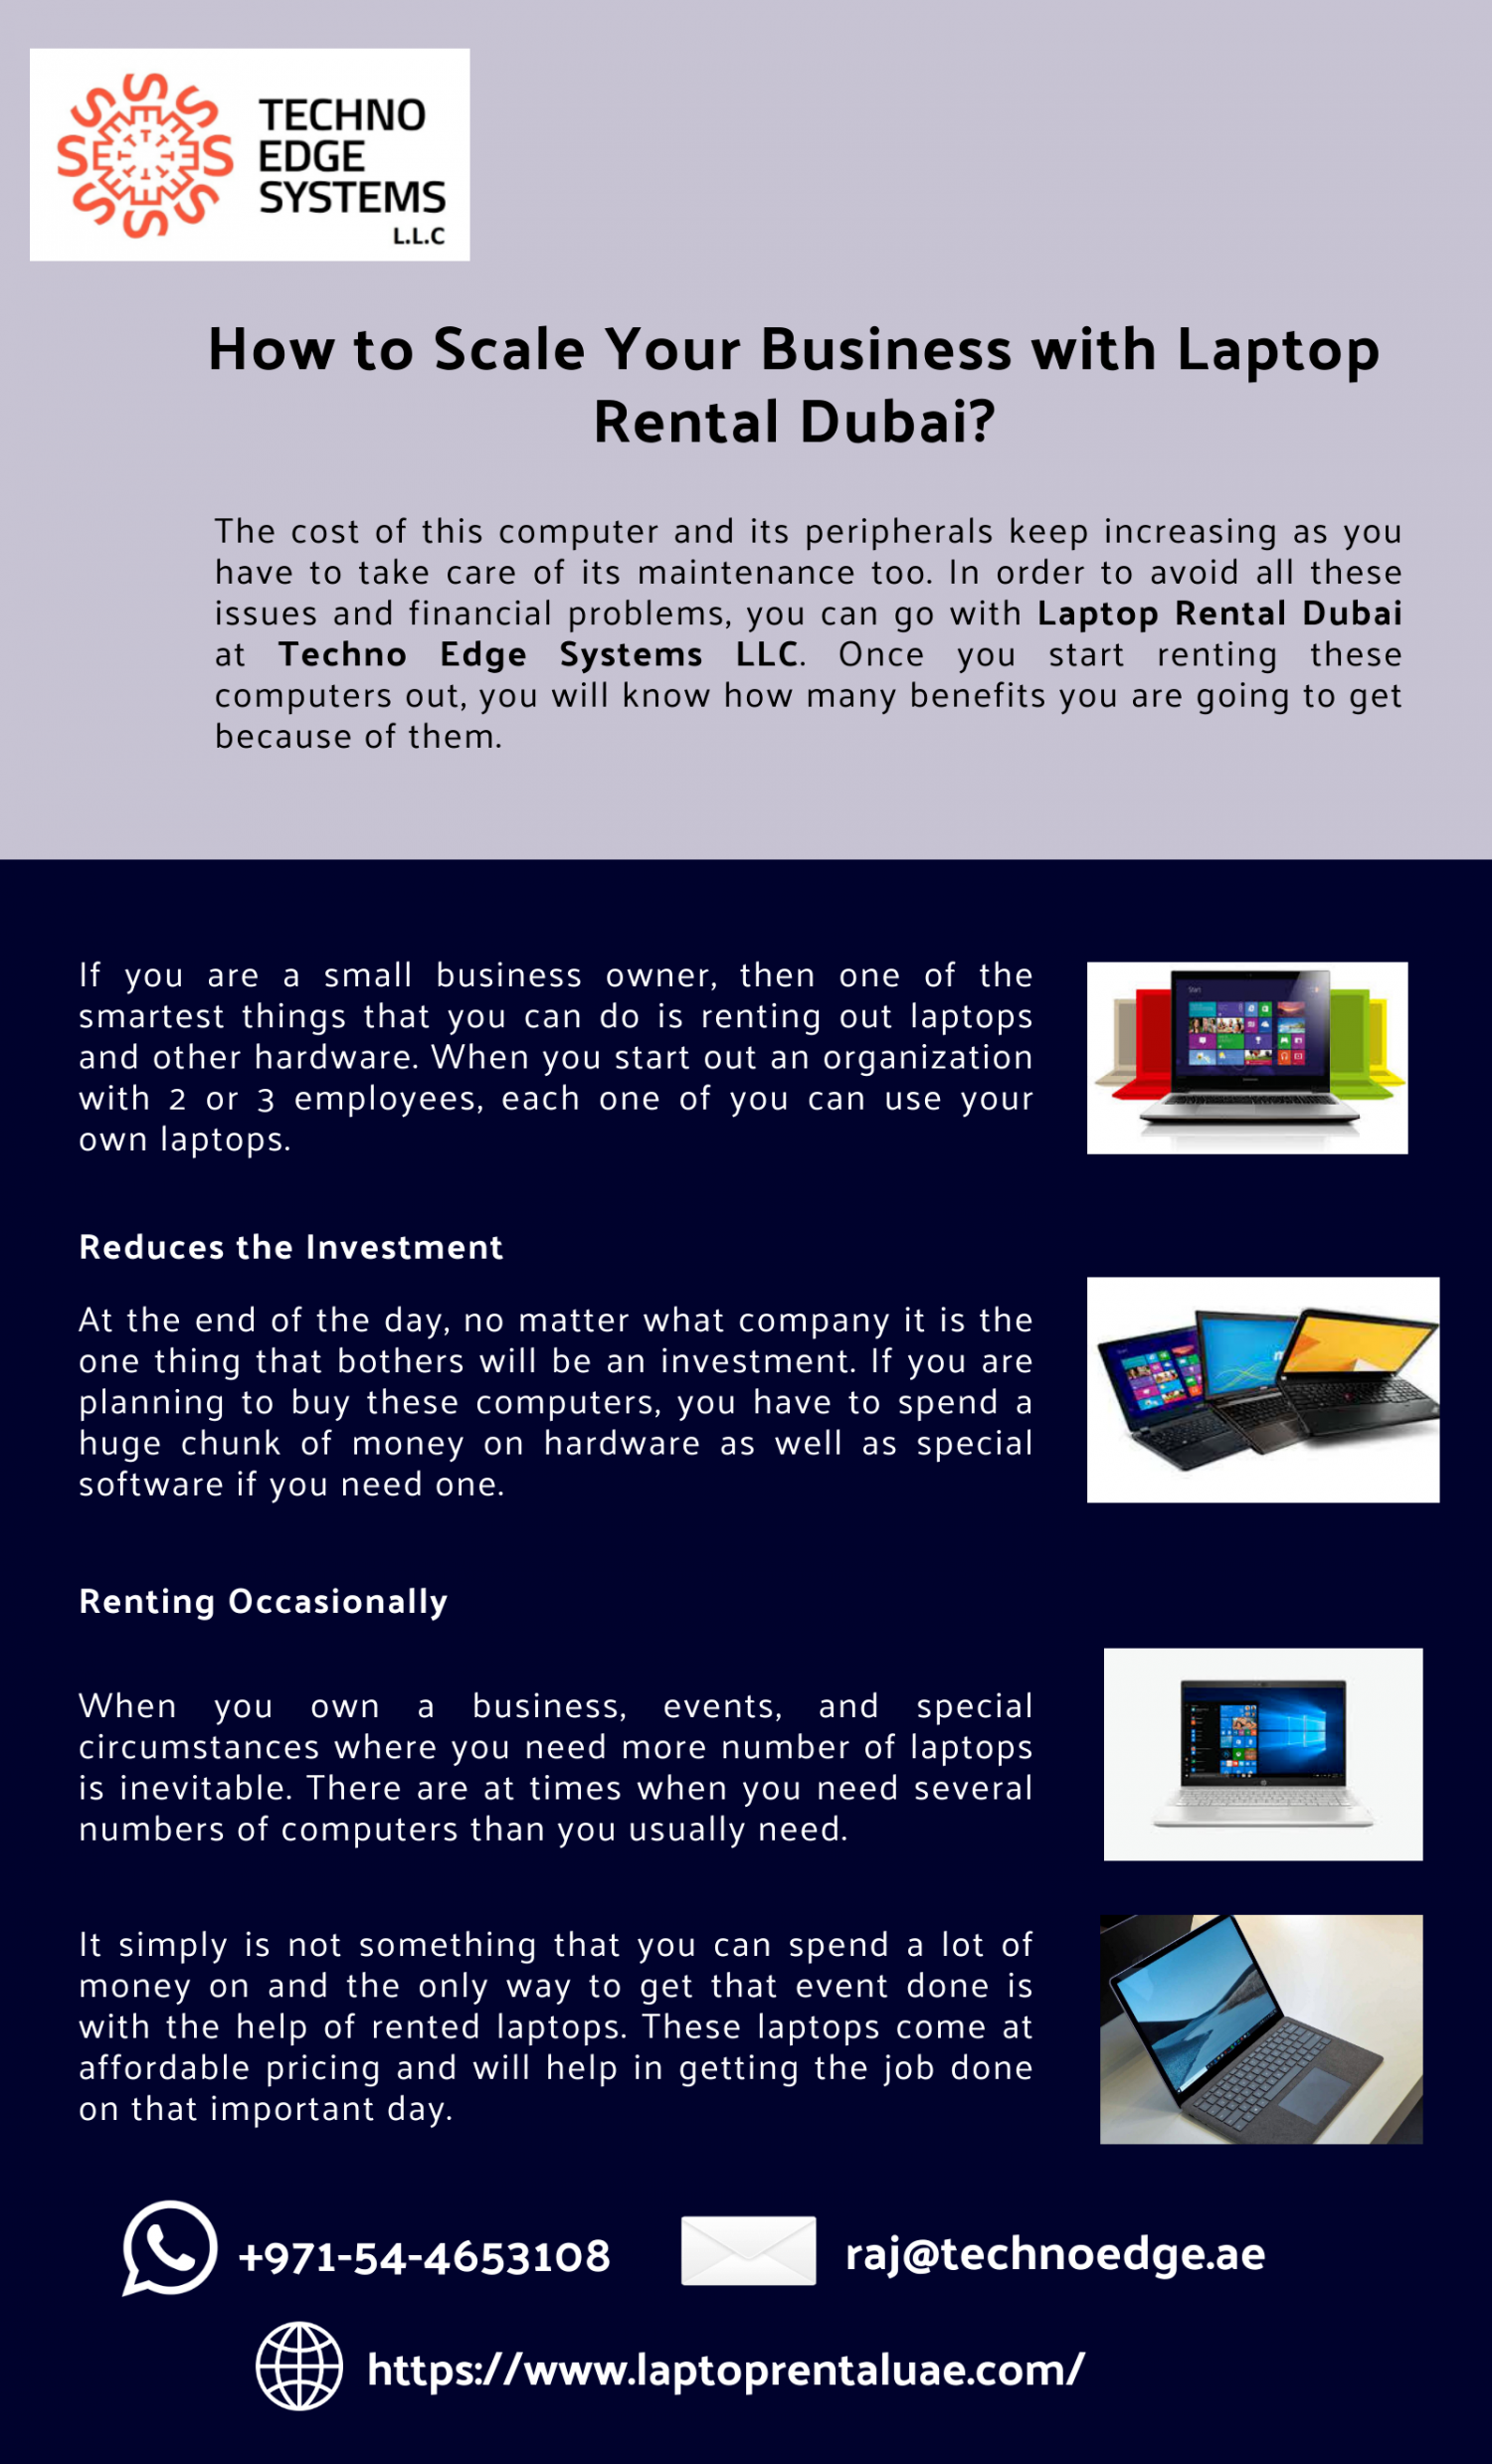 How to Scale Your Business with Laptop Rental Dubai? Infographic